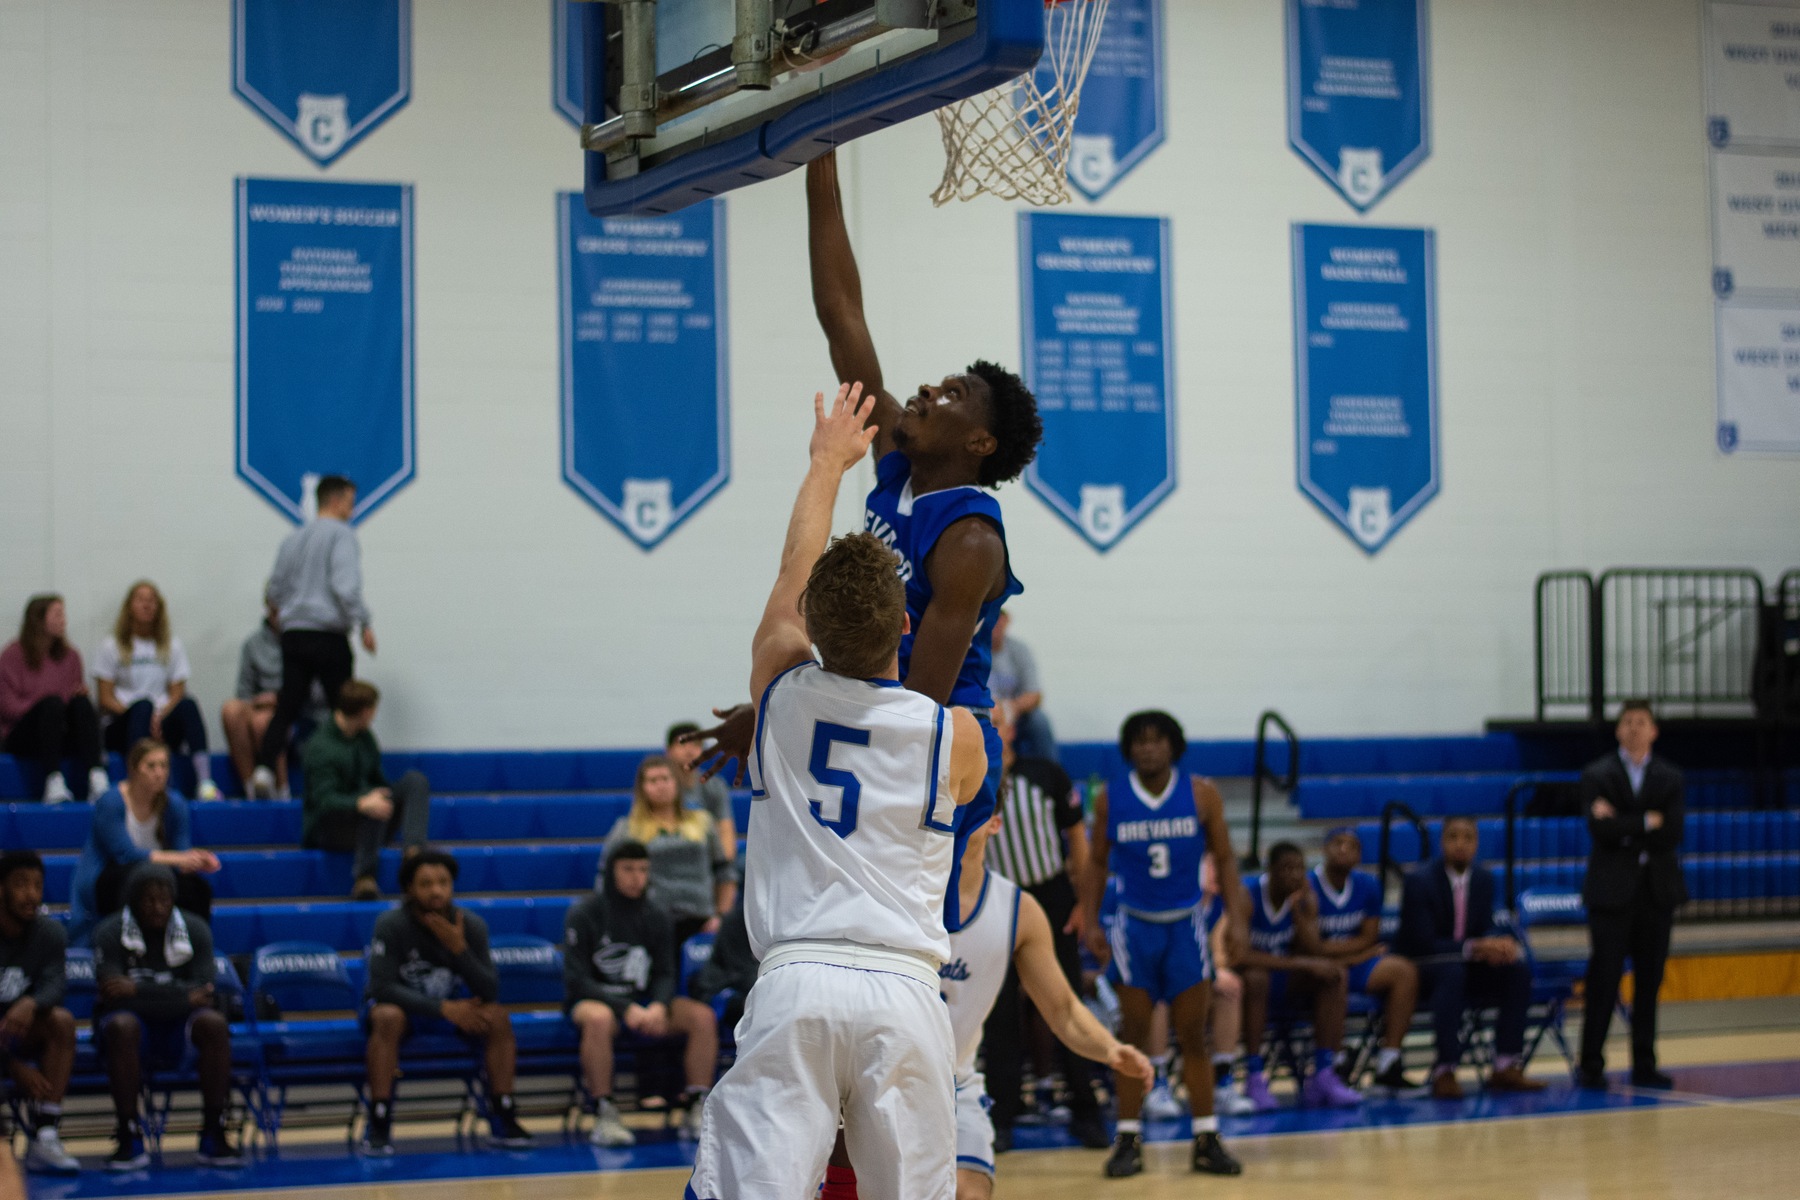 Levi Lamb scoring his 1,000th career point against Covenant earlier this season (Photo courtesy of Nina Grauley - Covenant College)